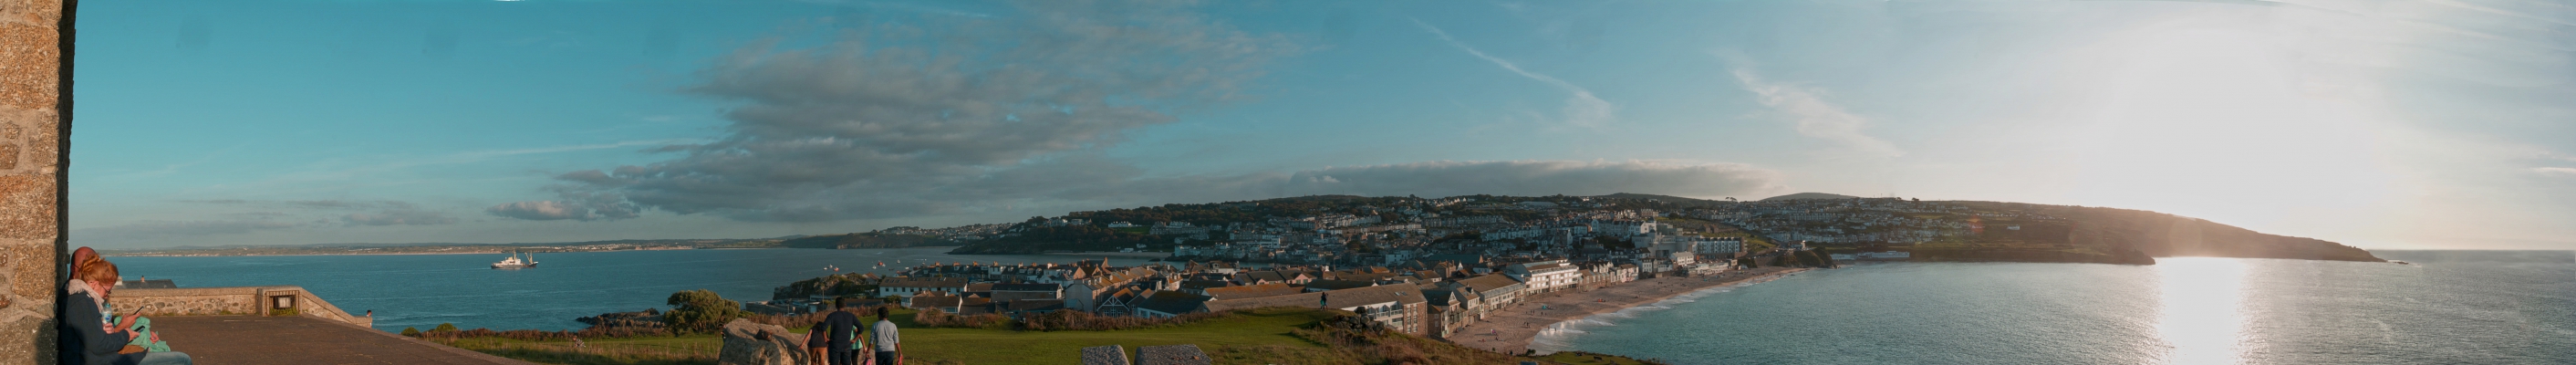 St Ives Panorama from the Island.jpg